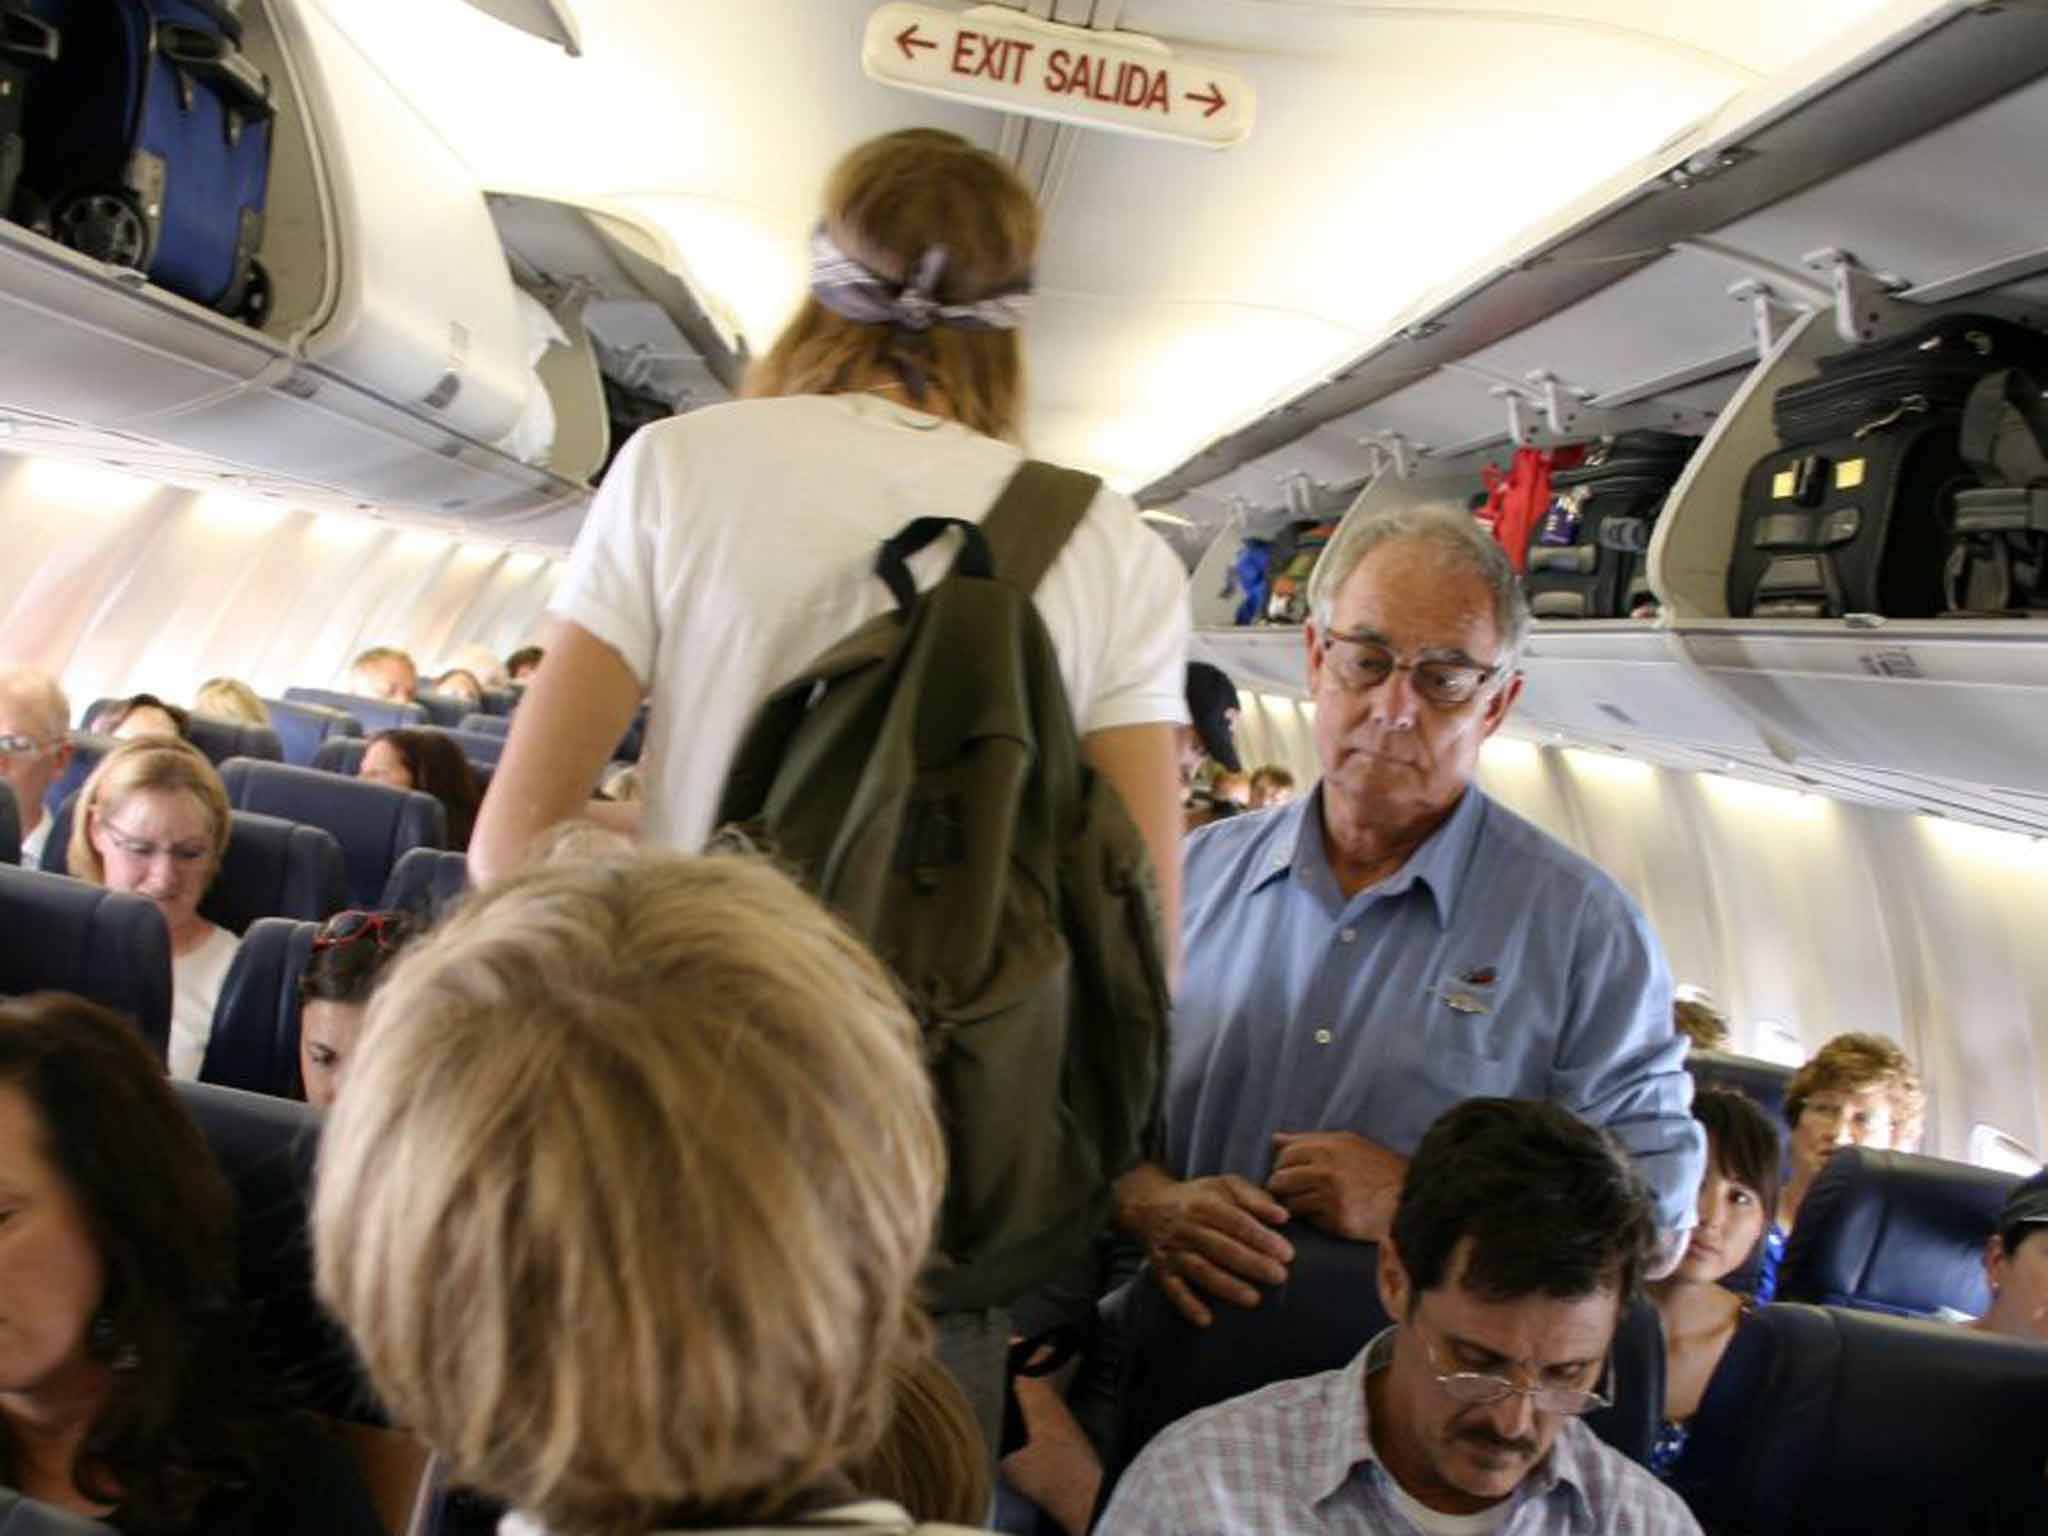 Take your seat: planes now typically fly close to capacity